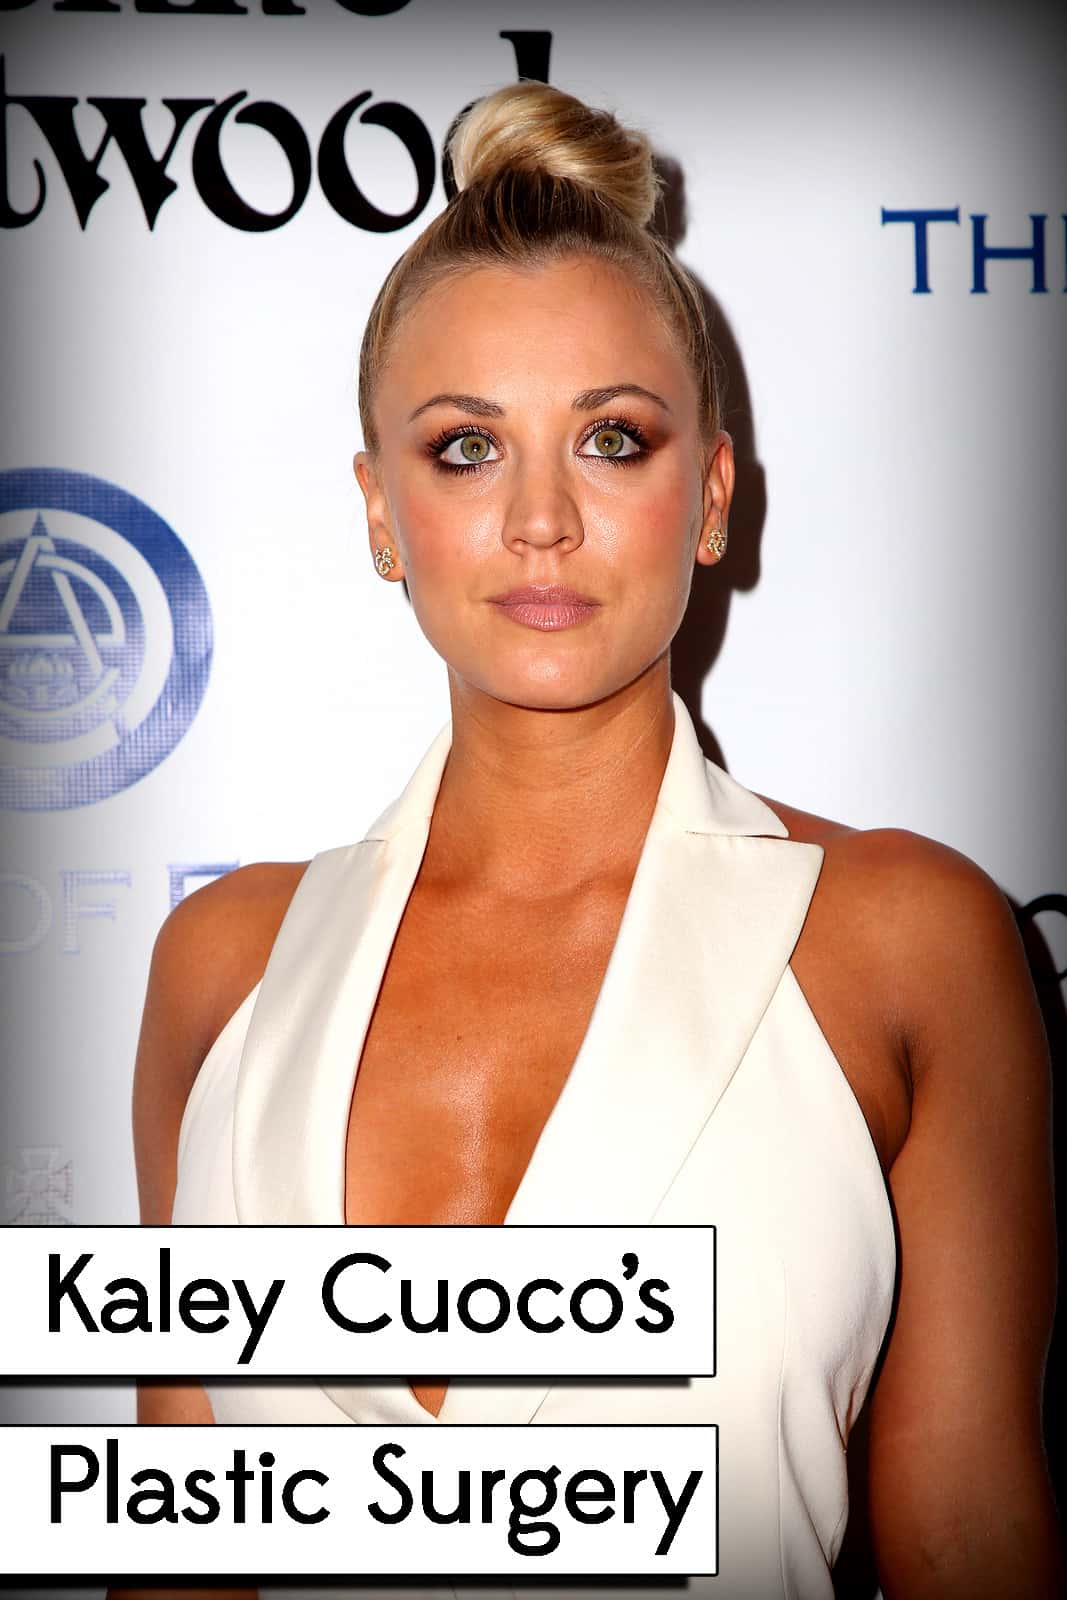 Kaley Cuoco opens up and shares her experience on having plastic surgery.